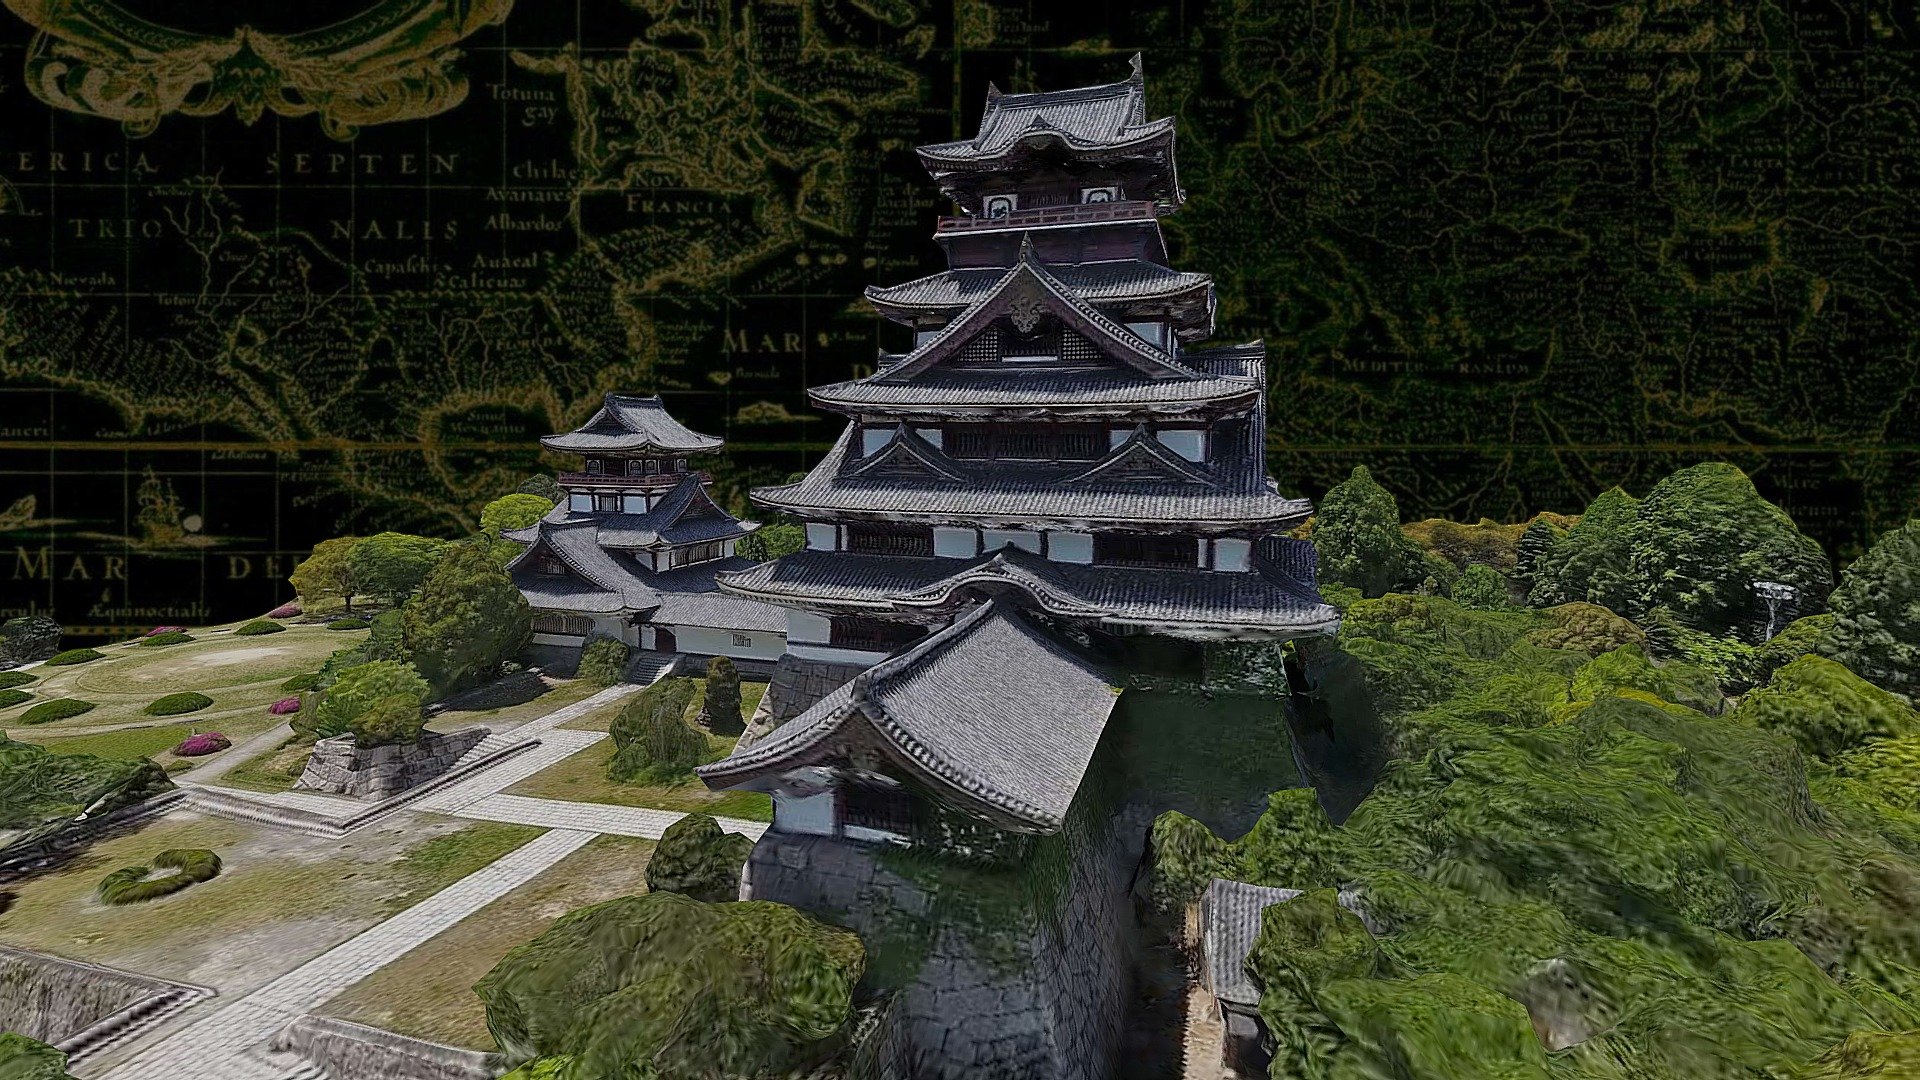 From video source.
Fushimi Castle (伏見城 Fushimi-jō), also known as Momoyama Castle (桃山城 Momoyama-jō) or Fushimi-Momoyama Castle, is a castle in Kyoto's Fushimi Ward. The current structure is a 1964 replica of the original built by Toyotomi Hideyosh.
The construction of the original castle was begun in 1592, the year after Hideyoshi's retirement from the regency, and completed in 1594. Twenty provinces furnished workers for the construction, which numbered between 20,000 and 30,000 - Fushimi Castle - 3D model by Raiz (@RaizVR) 3d model